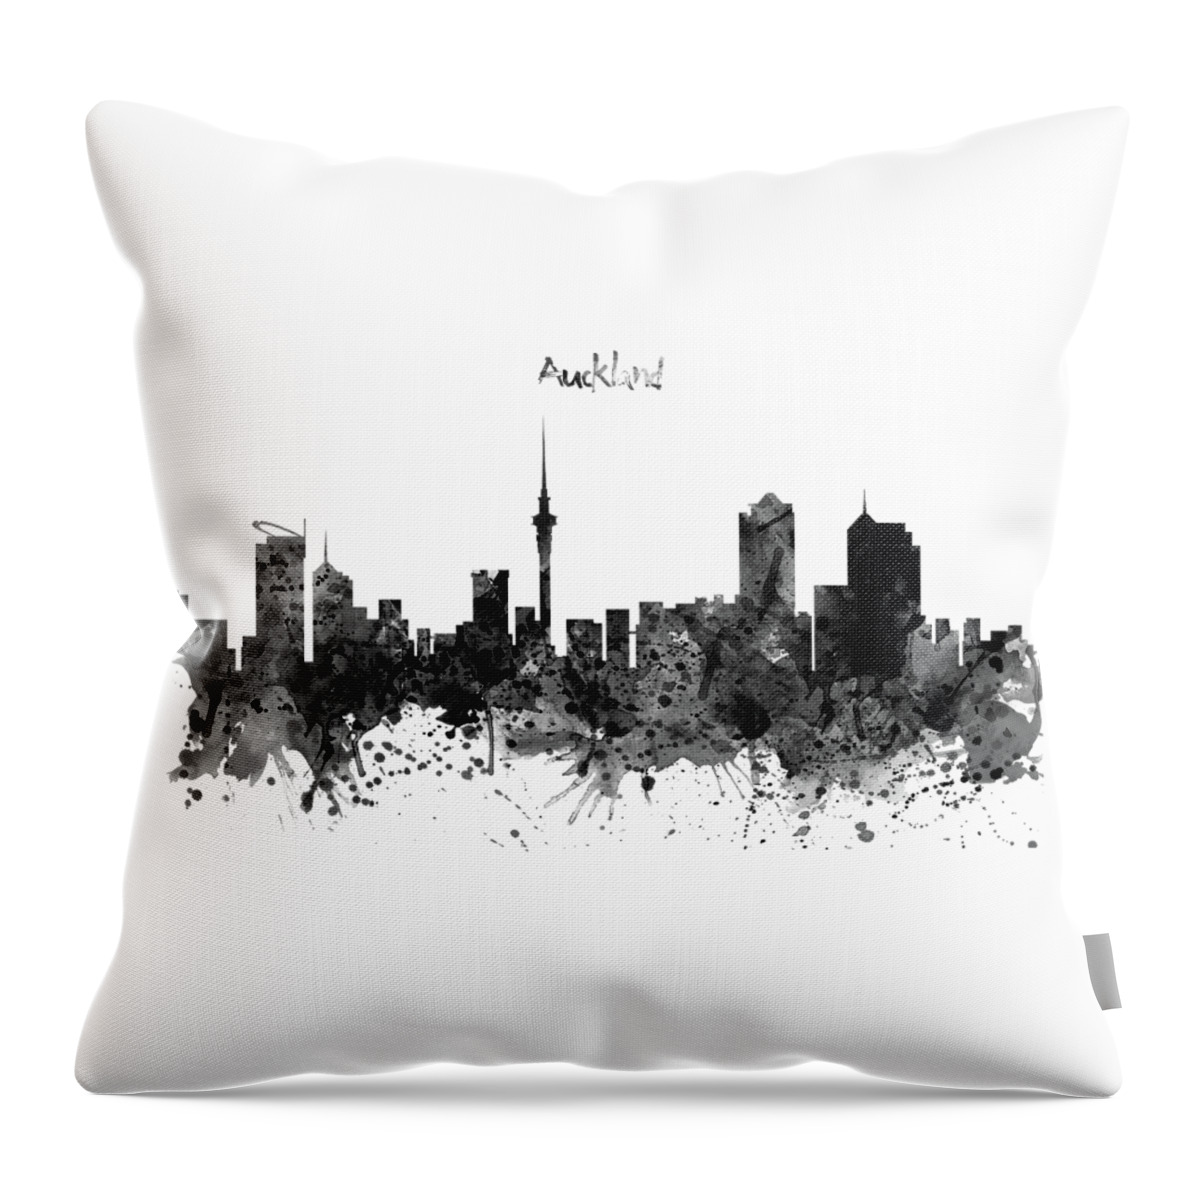 Marian Voicu Throw Pillow featuring the painting Auckland Black and White Watercolor Skyline by Marian Voicu